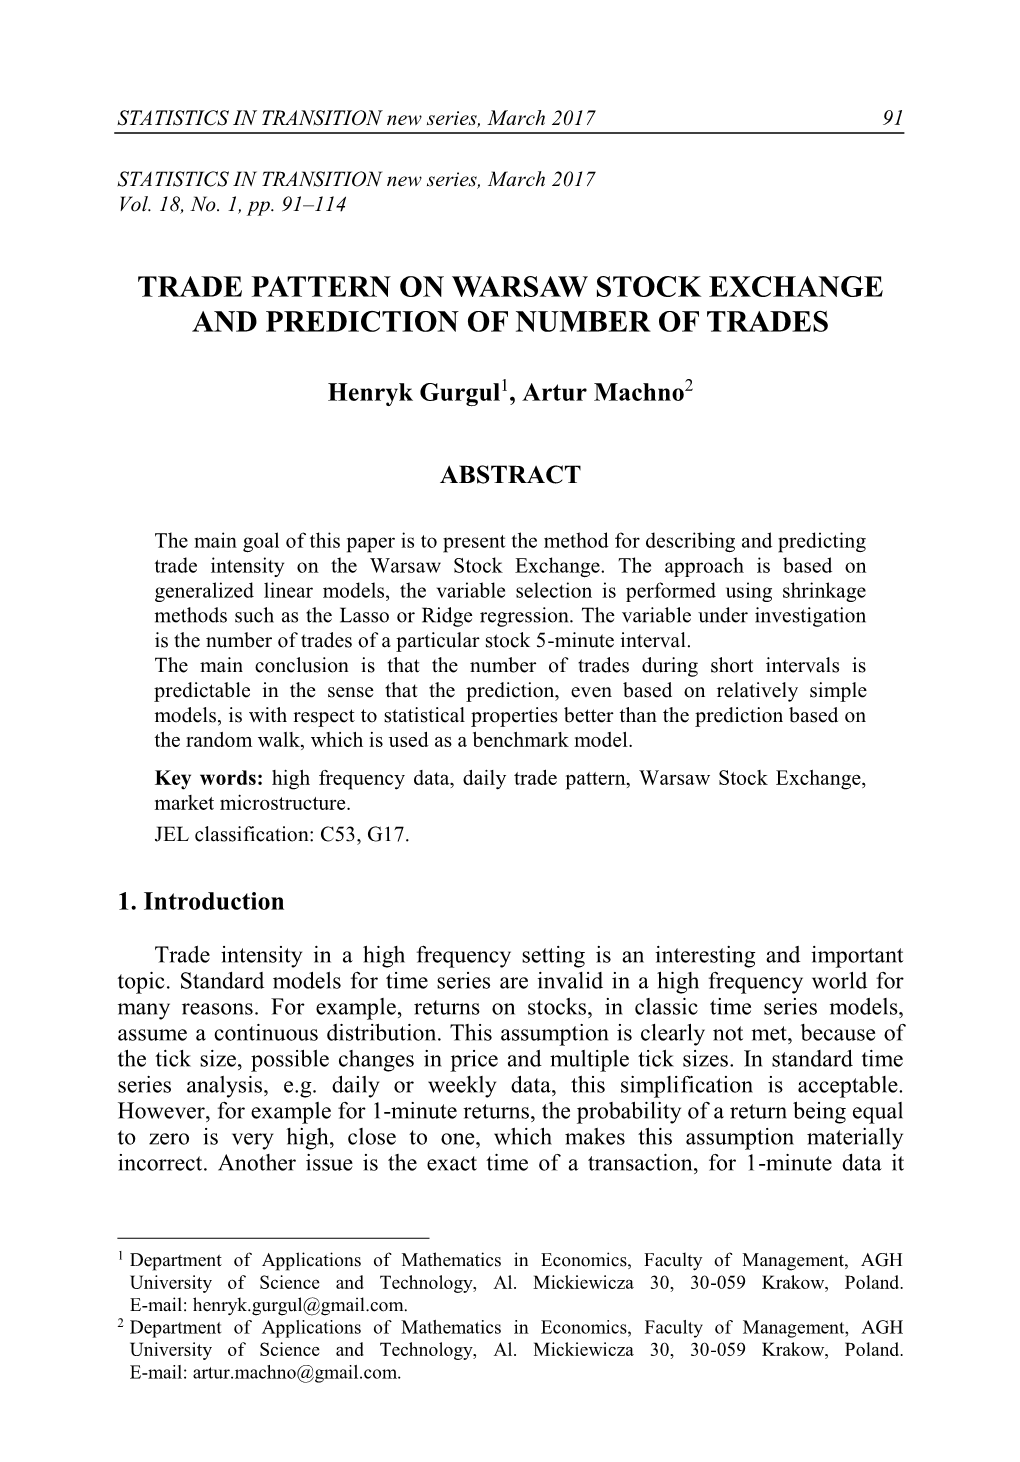 Trade Pattern on Warsaw Stock Exchange and Prediction of Number of Trades